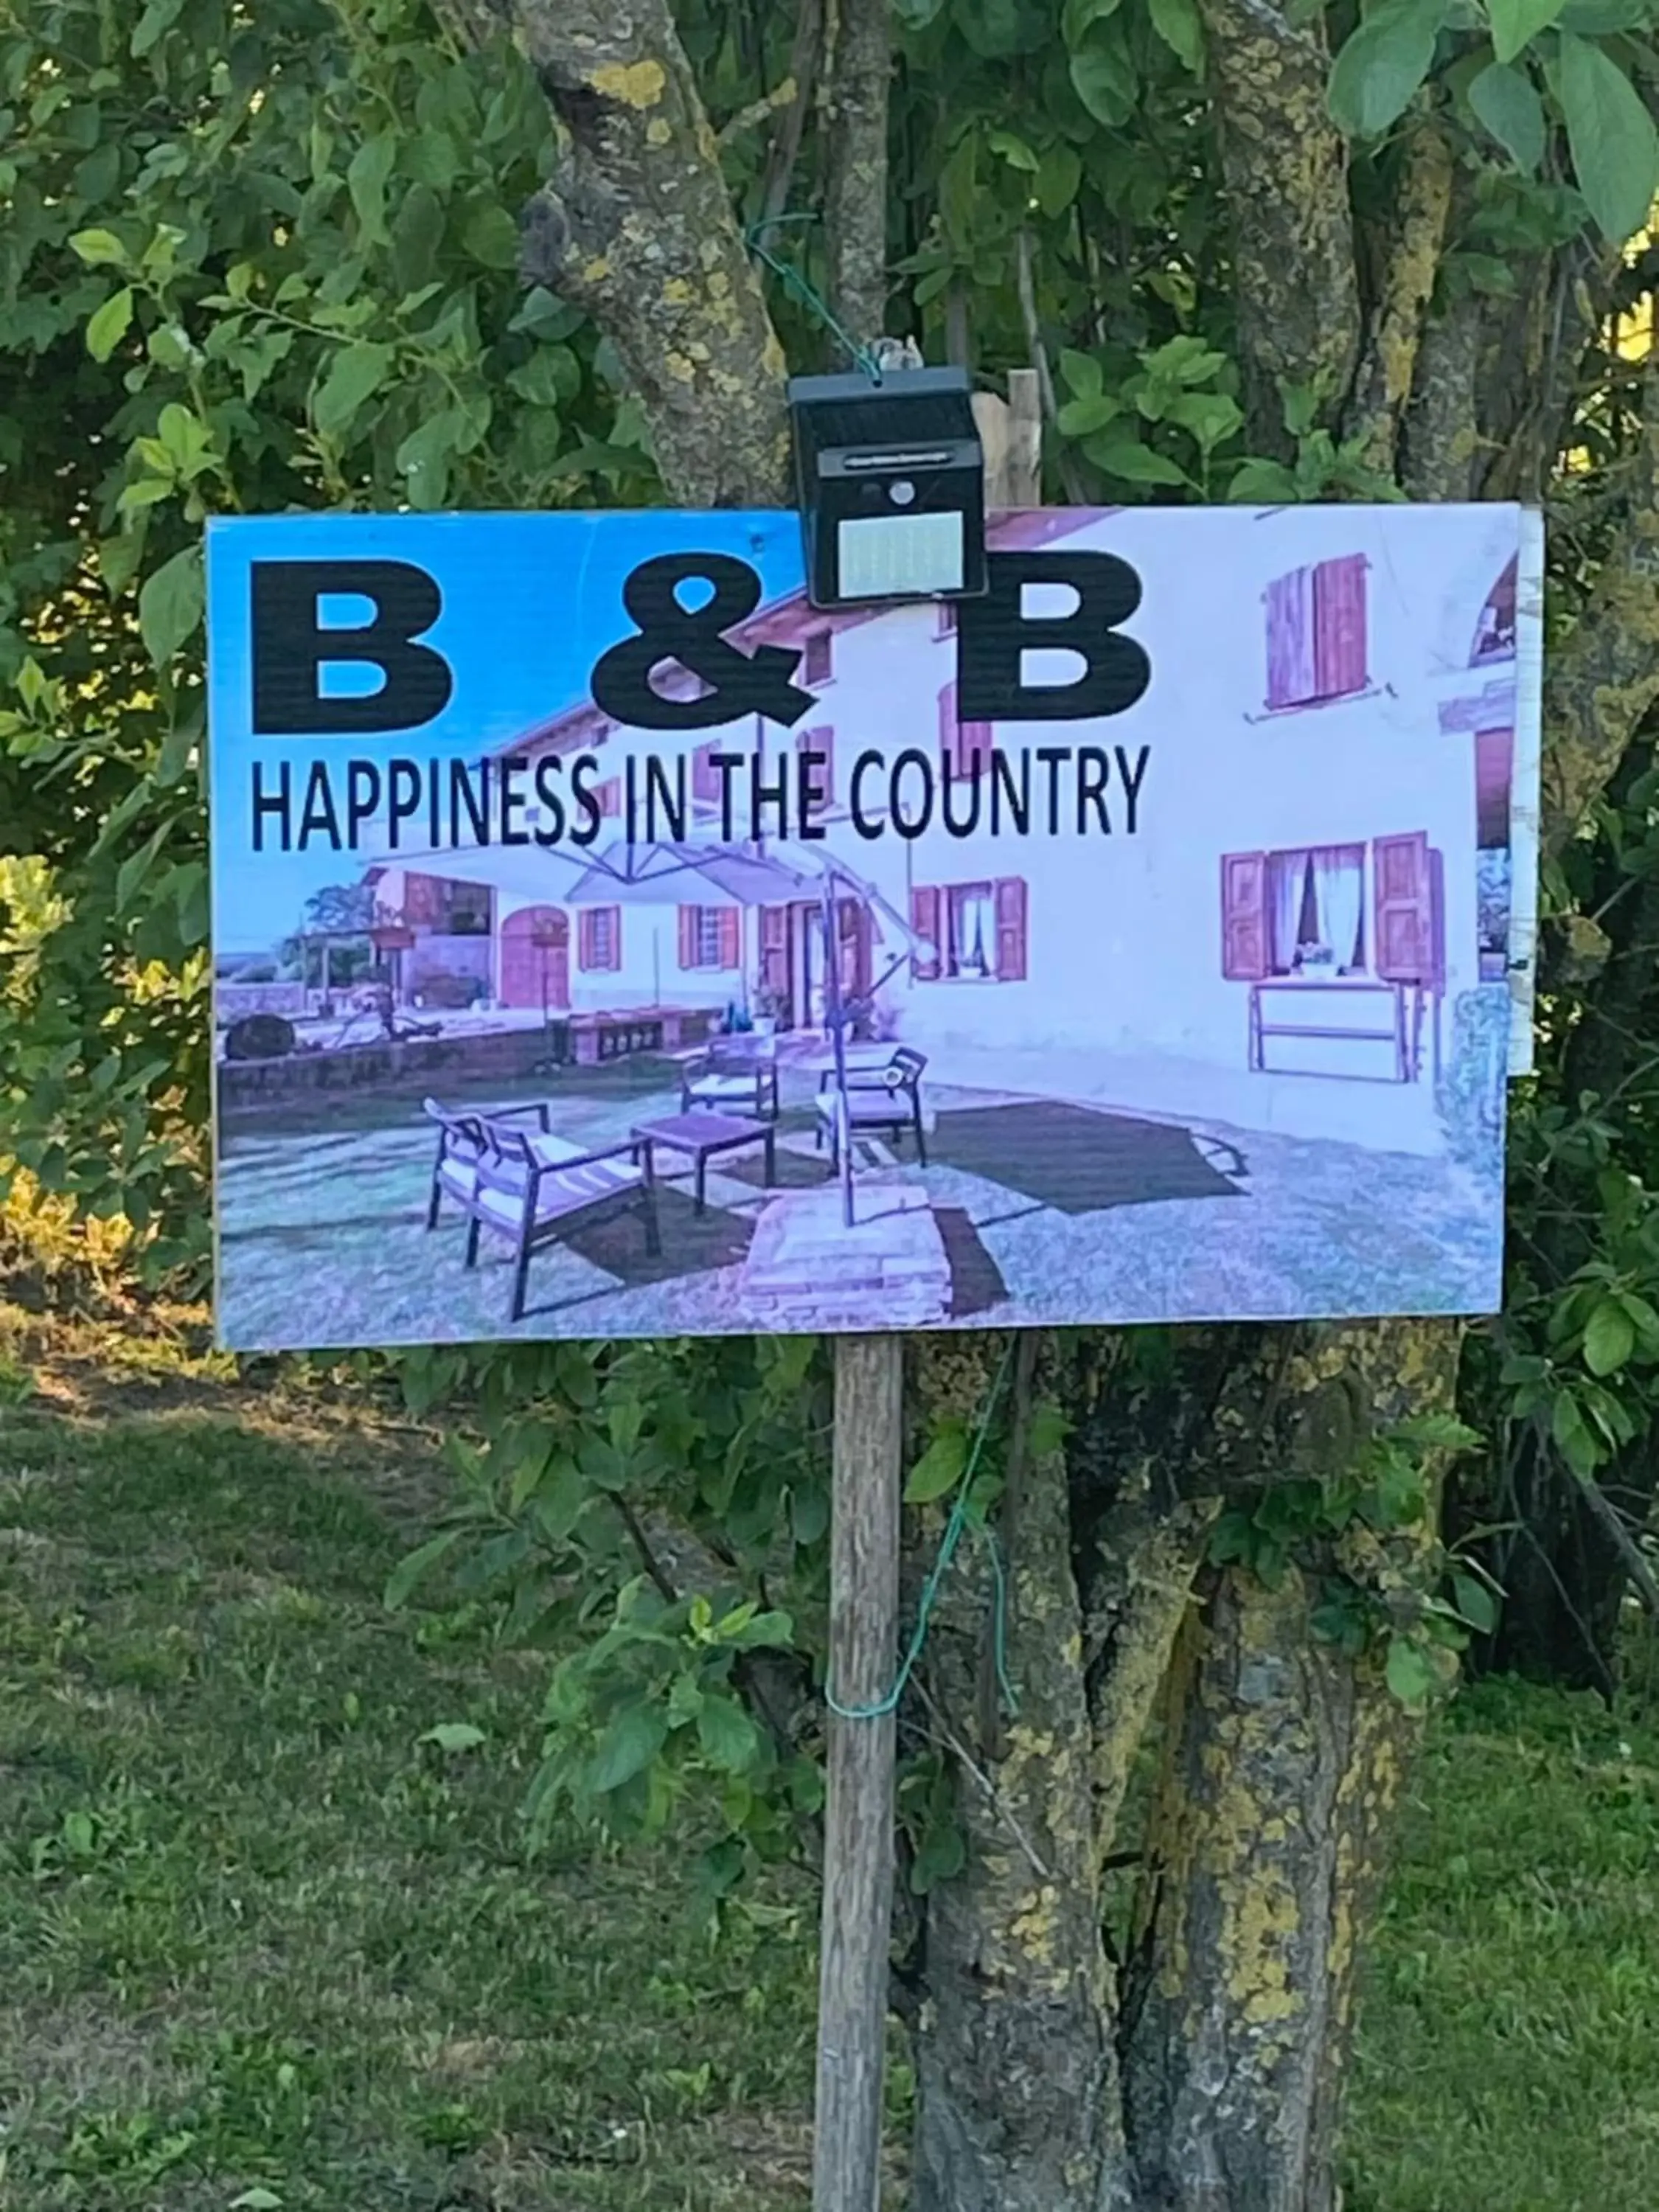 B&B Happiness in the Country